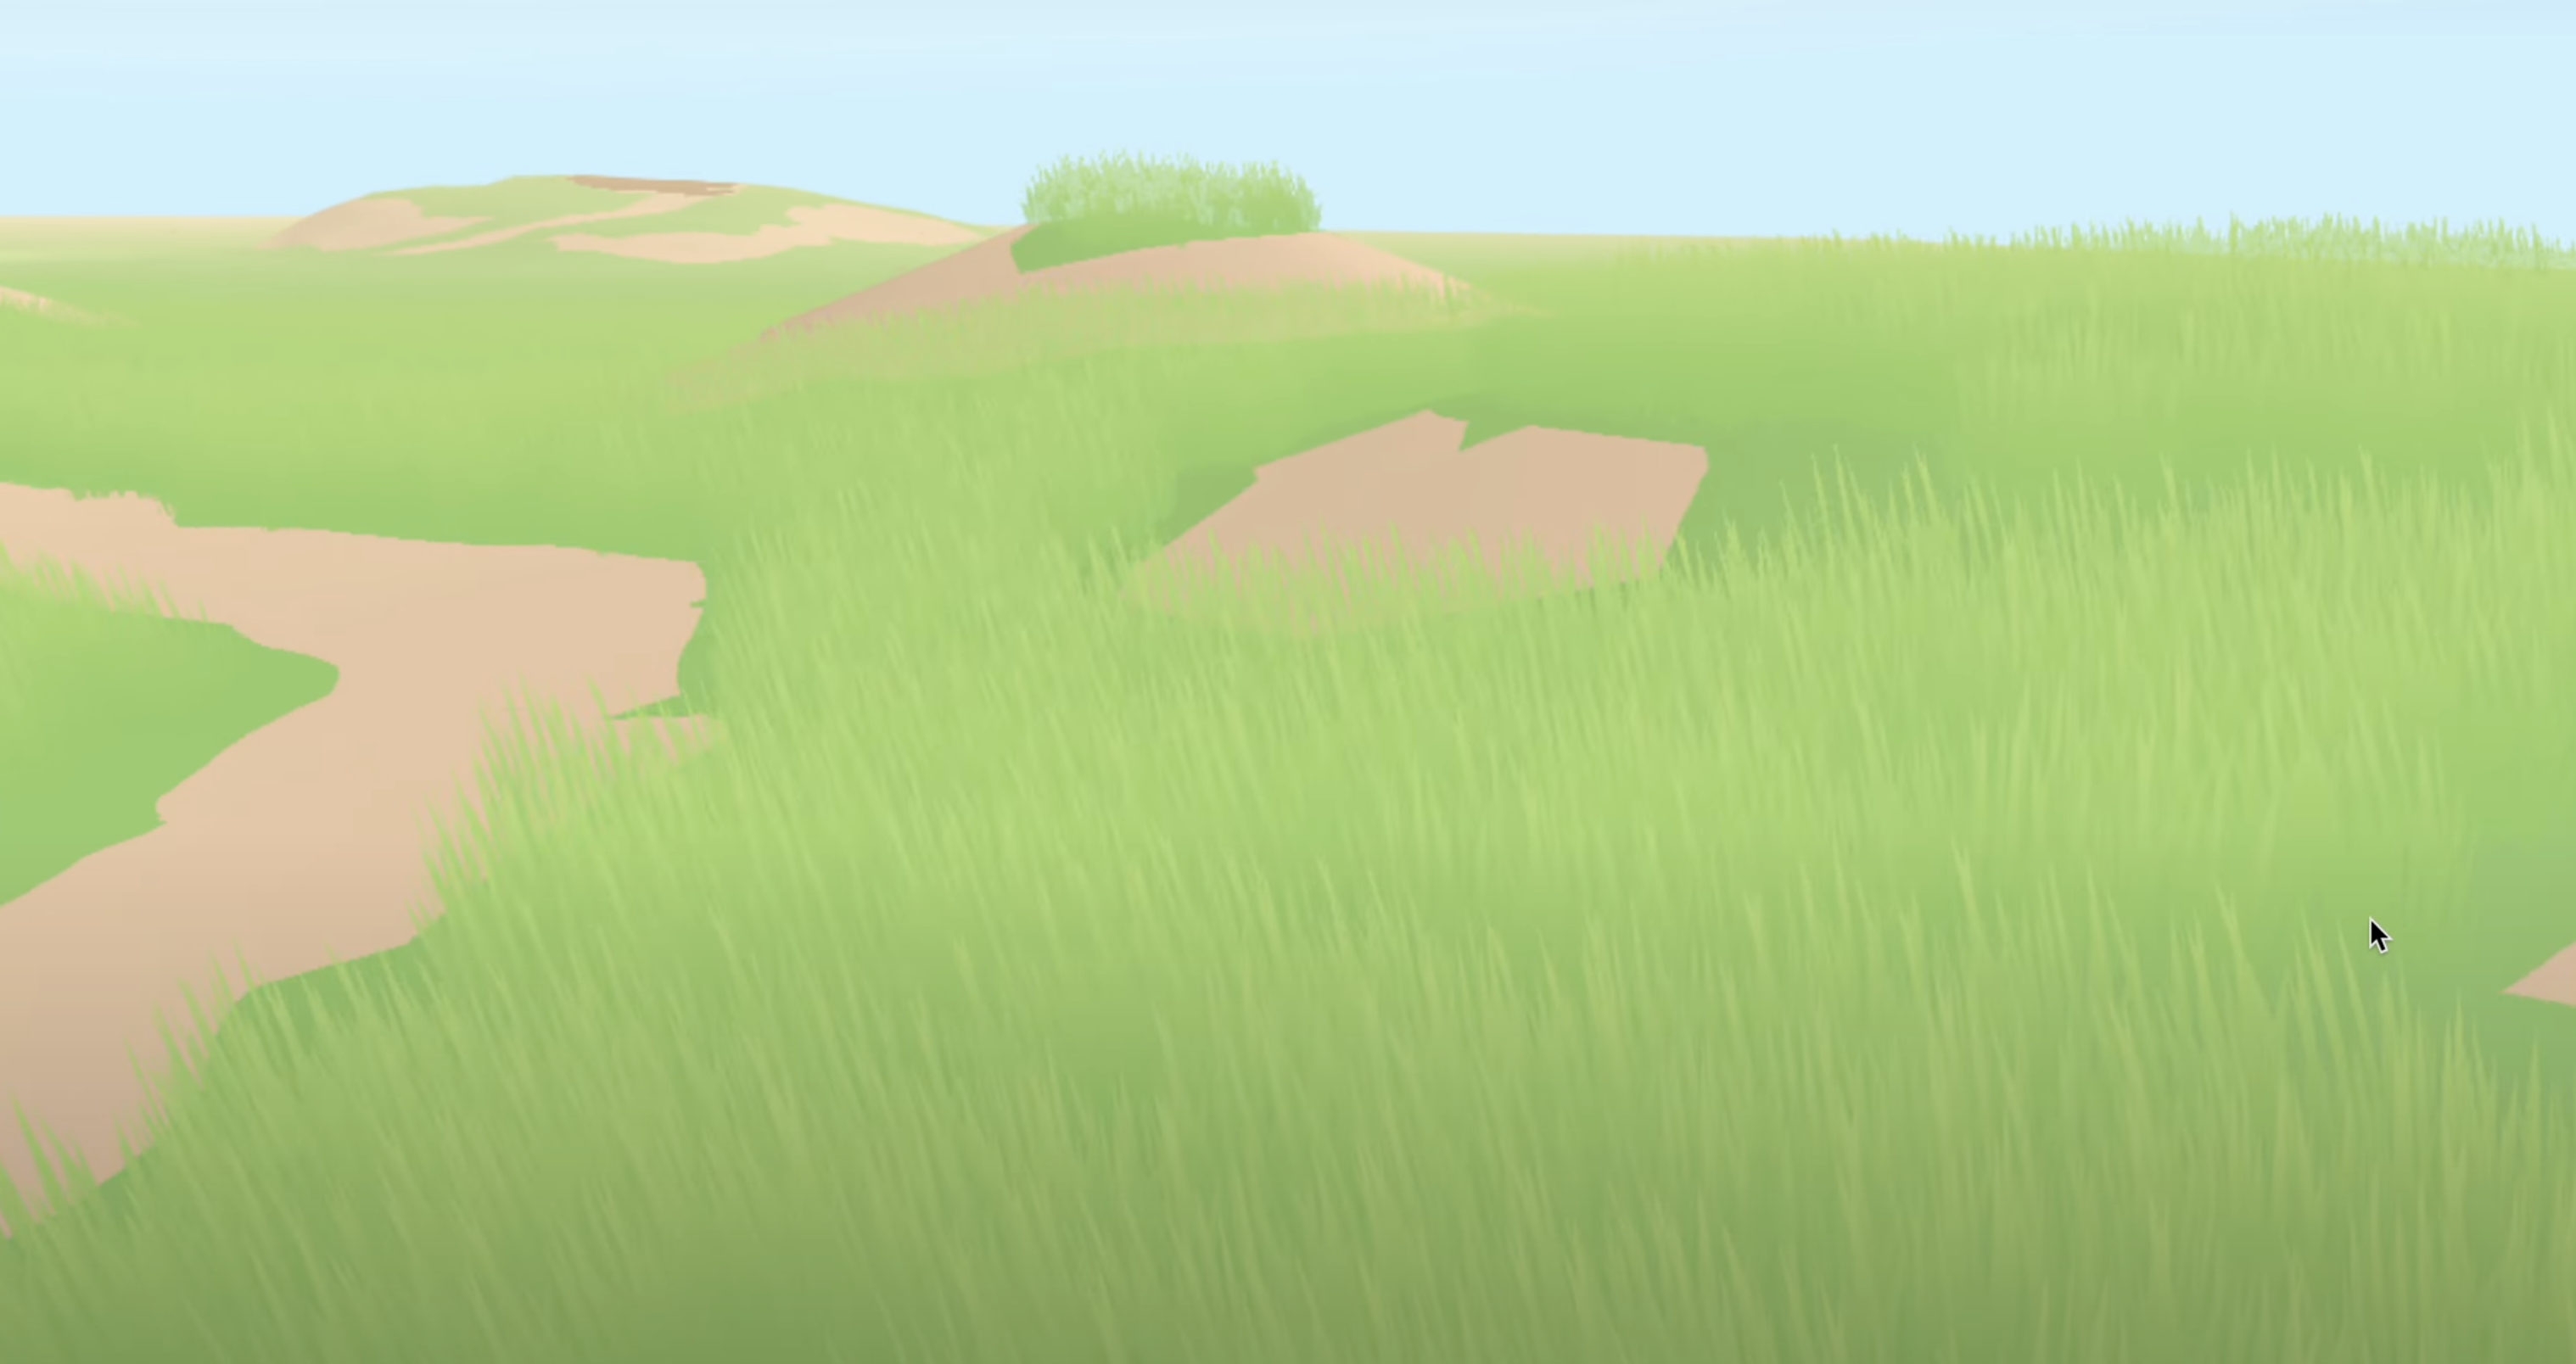 Procedural generation of instanced grass and foliage